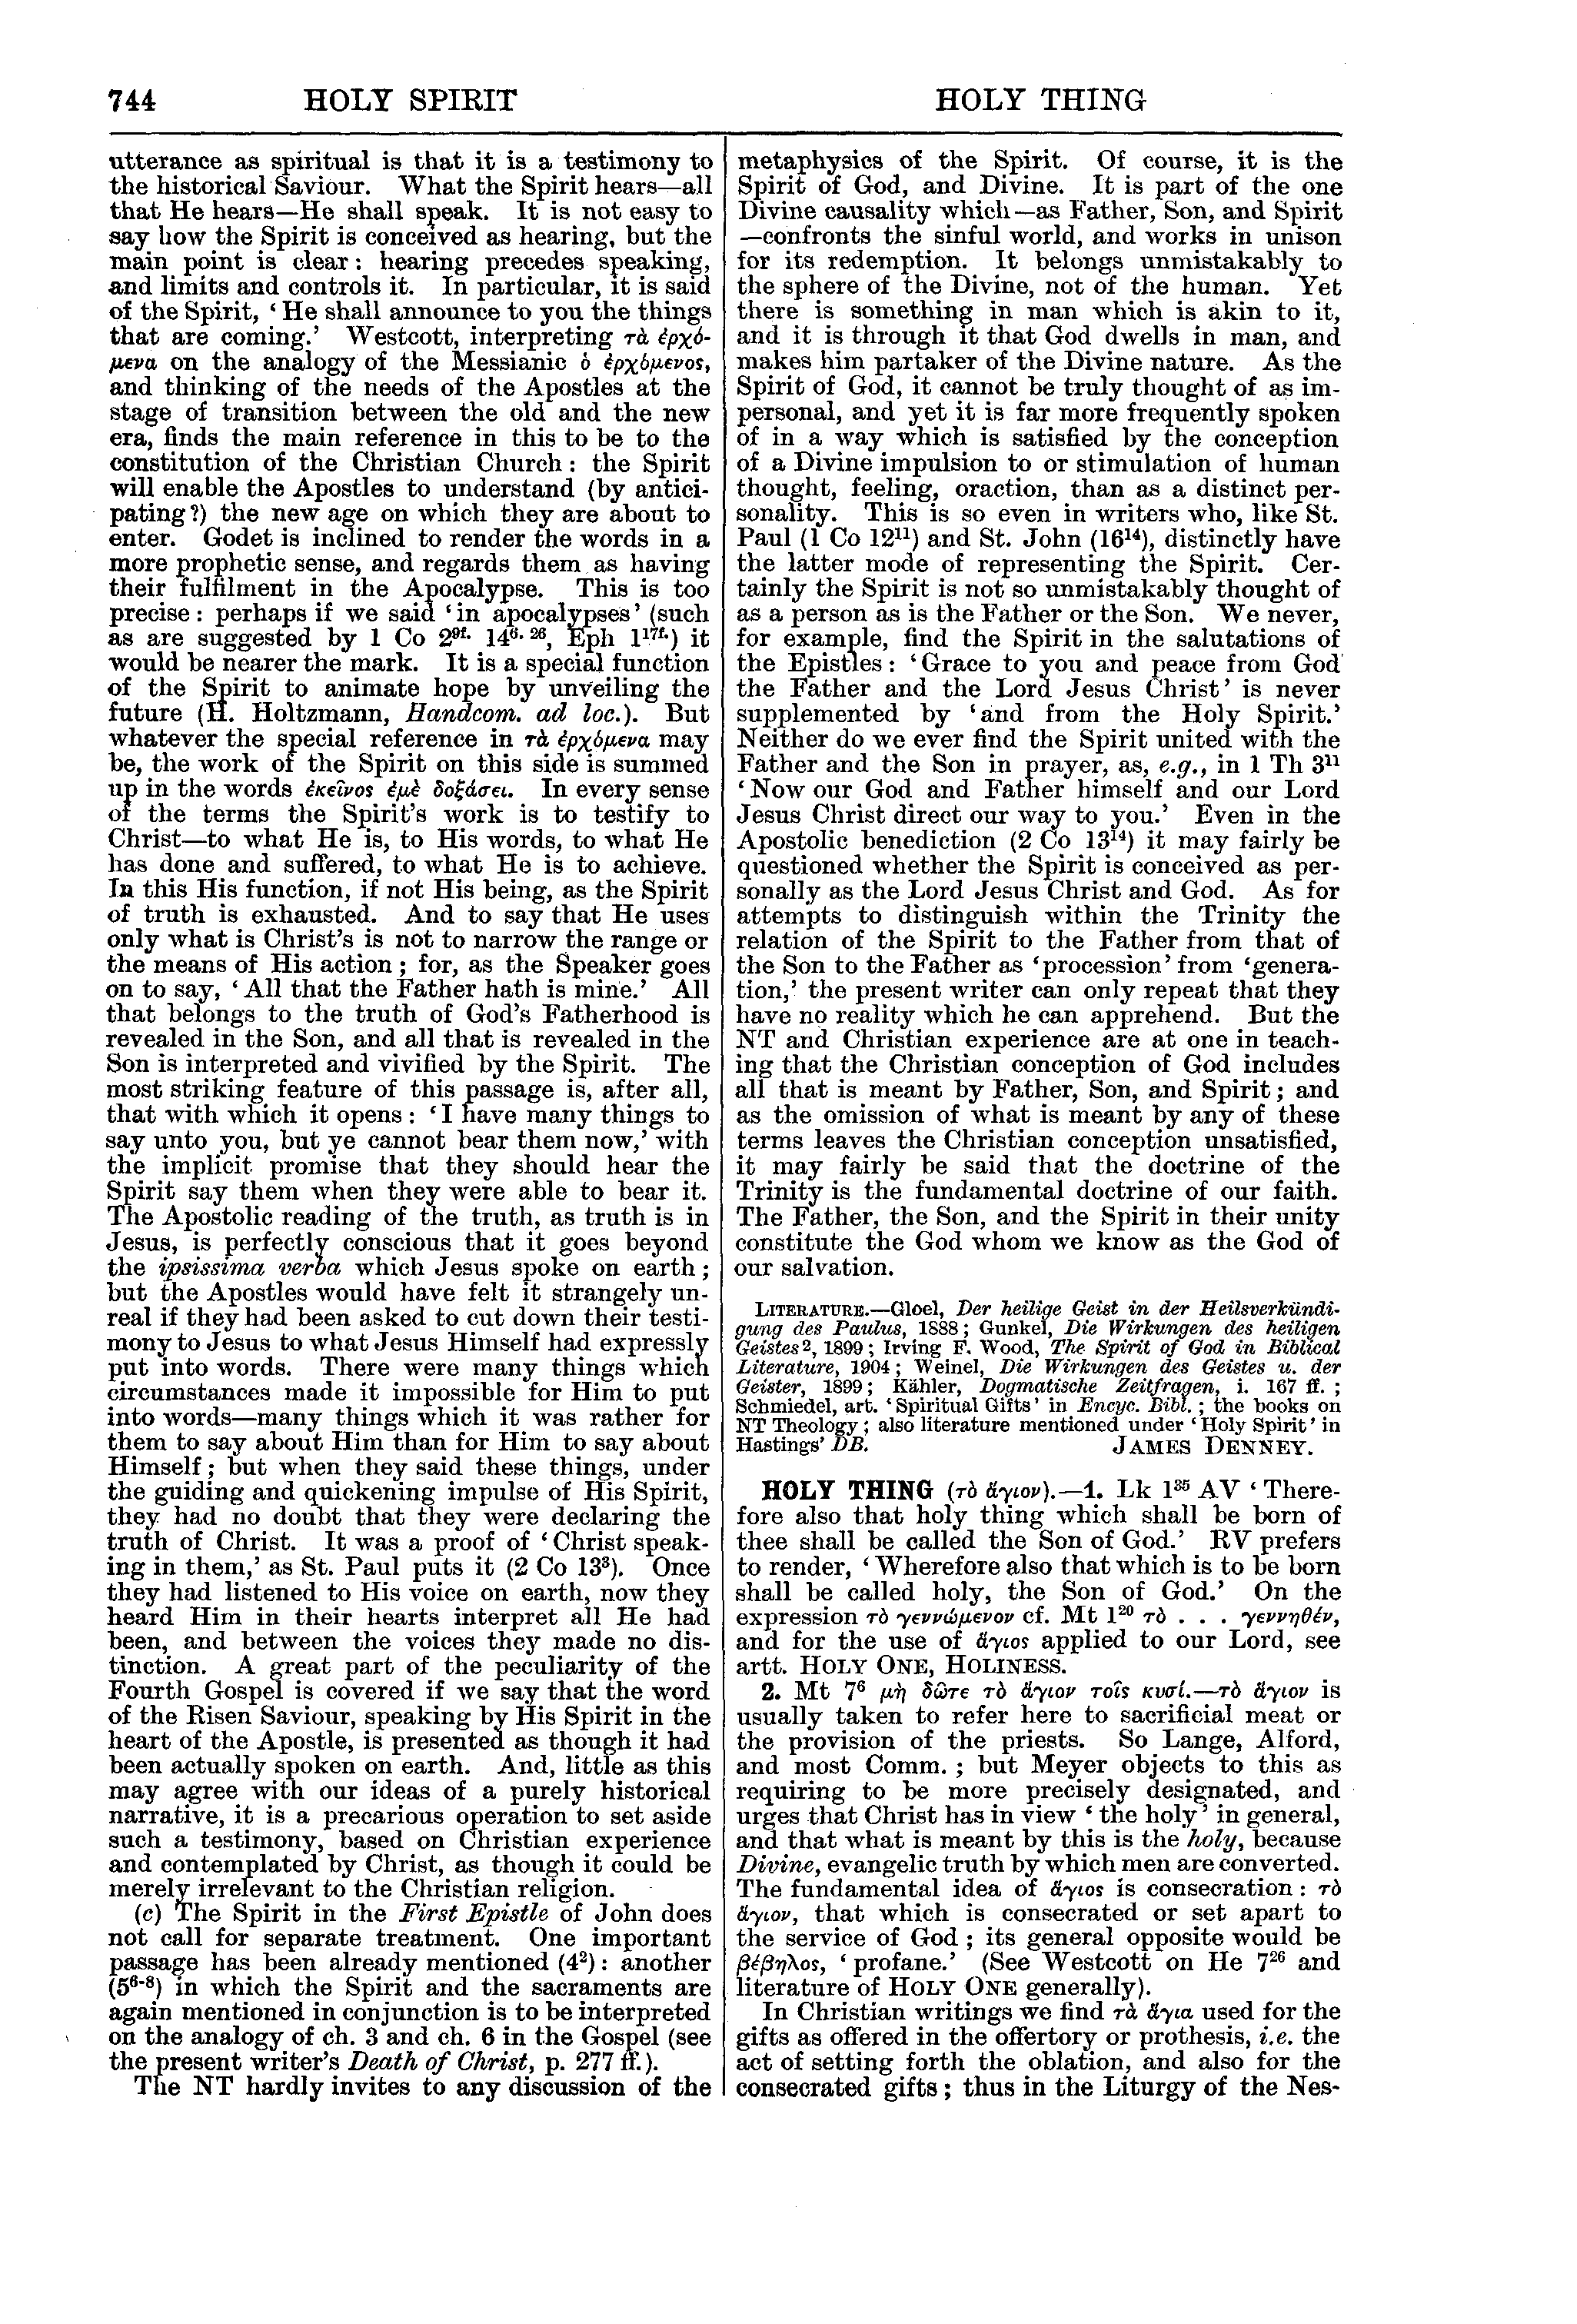 Image of page 744